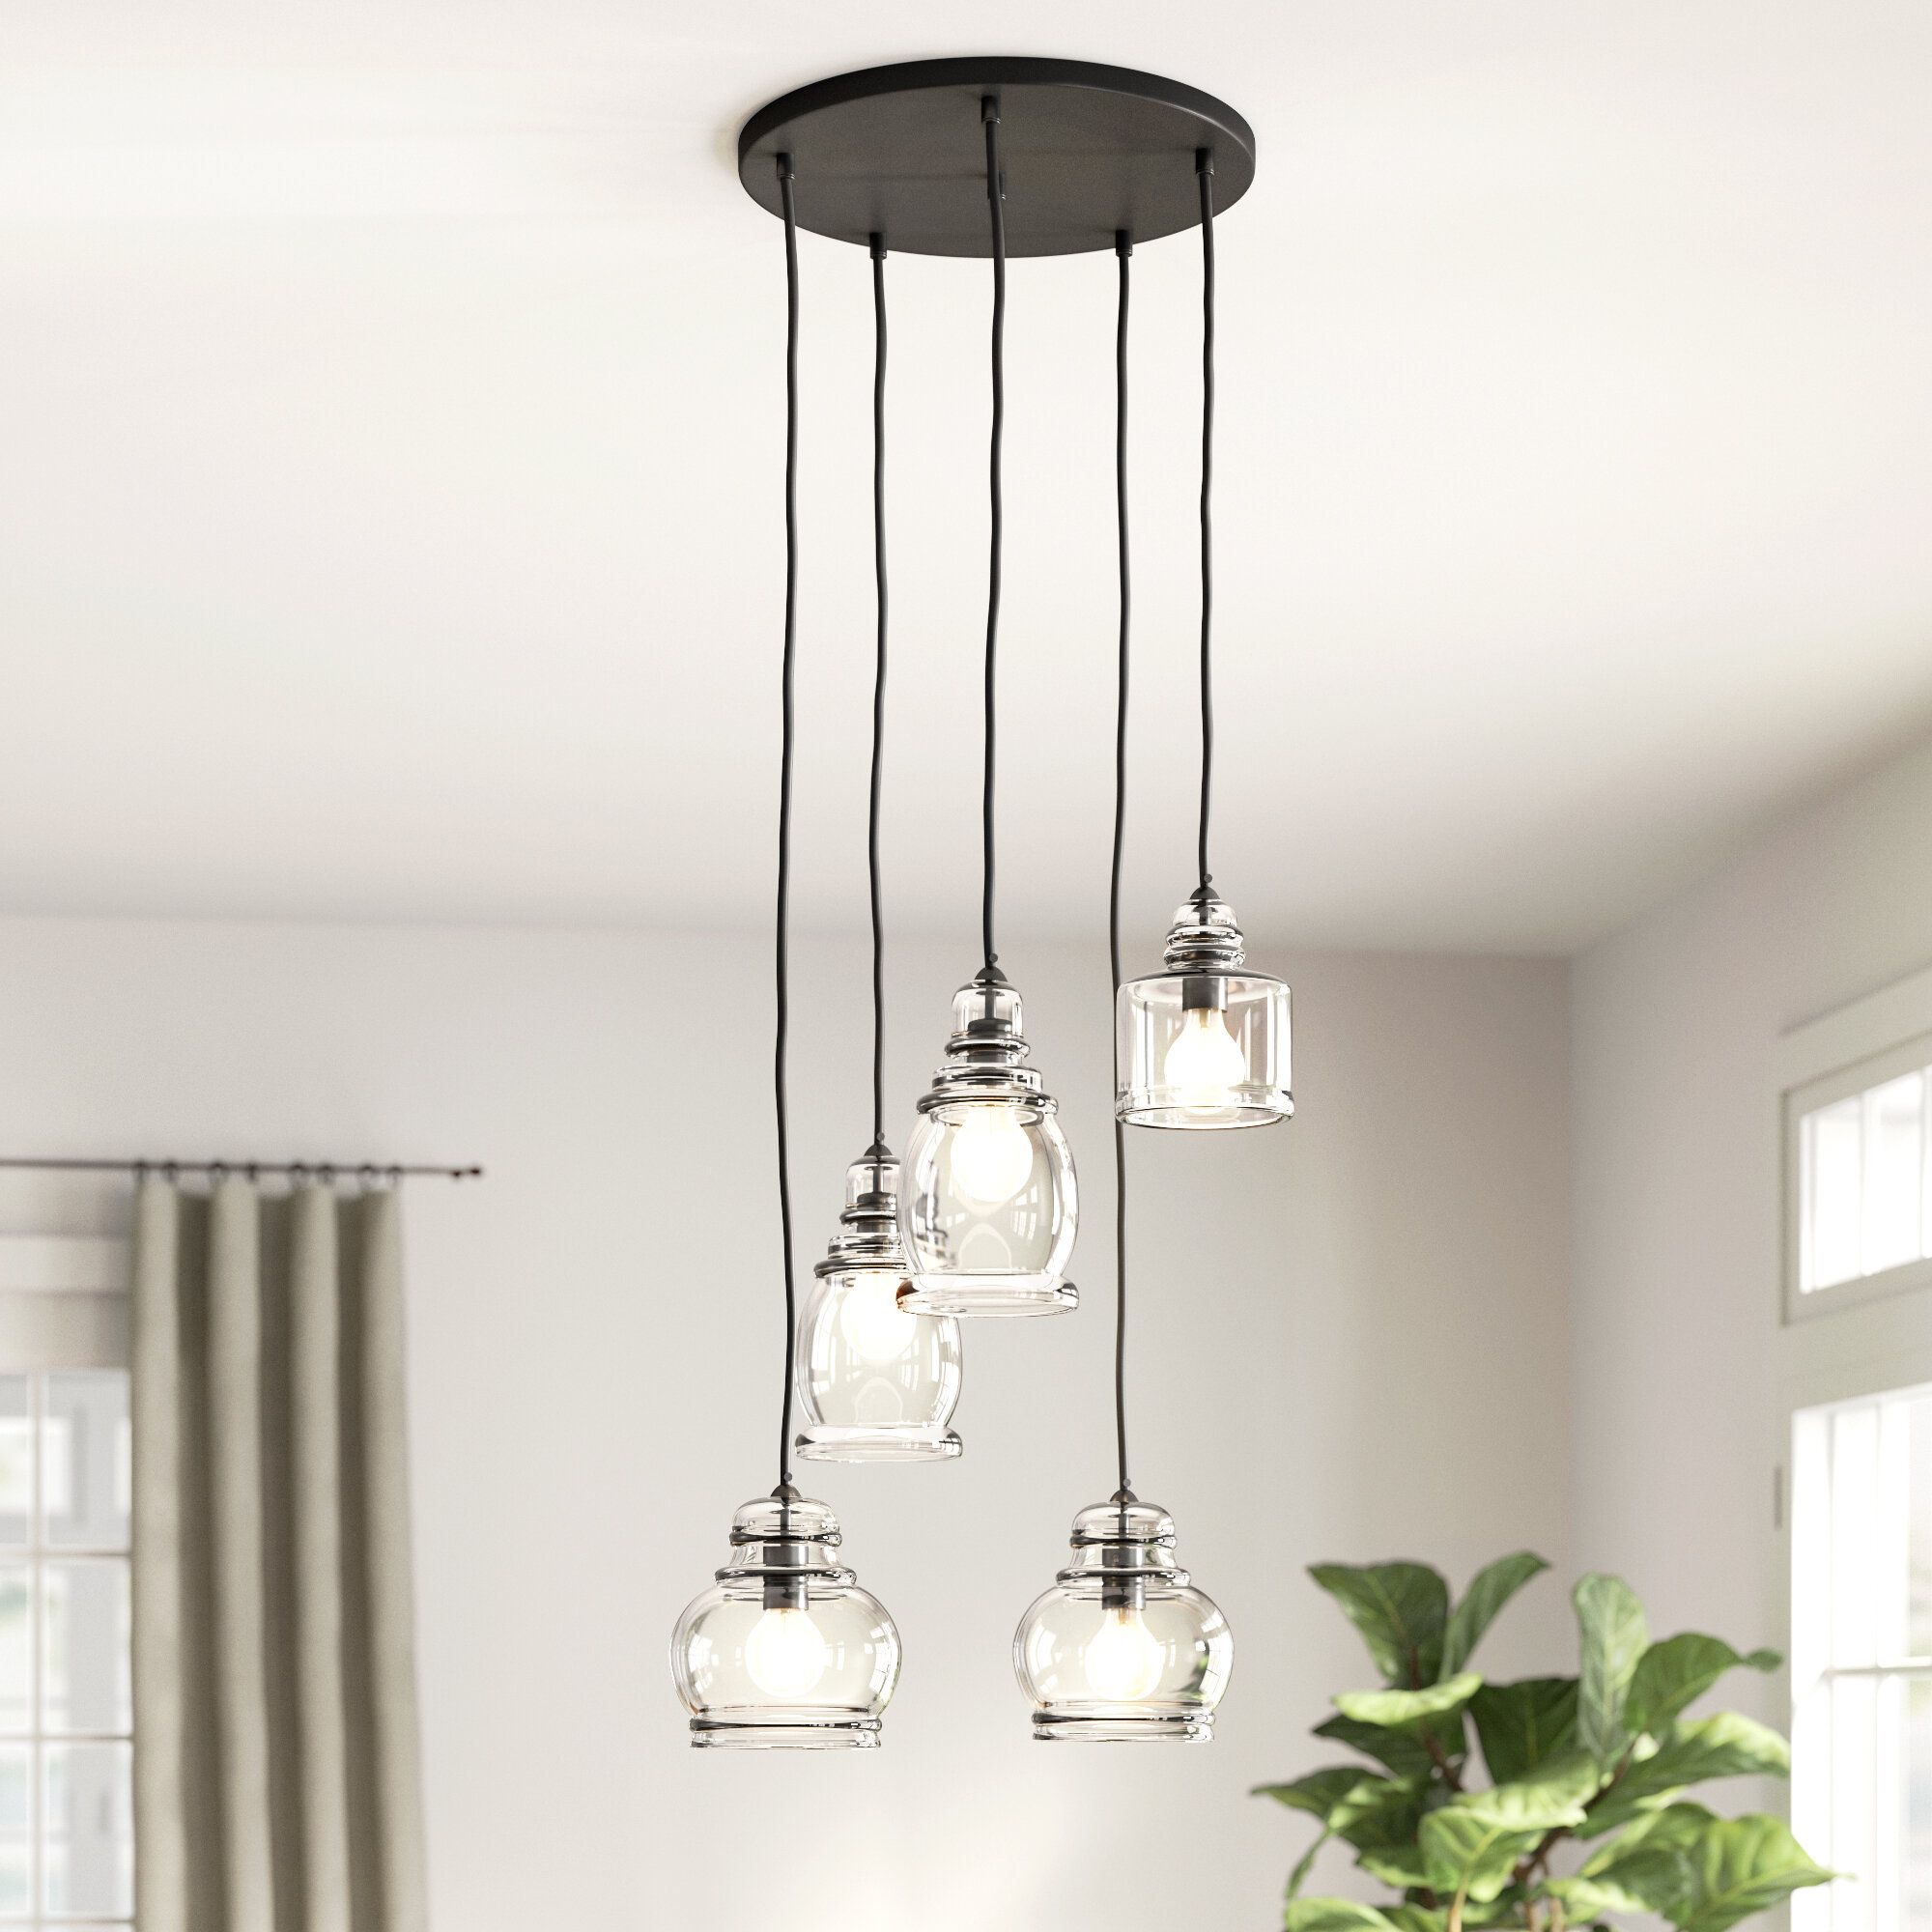 5 Light Cluster Bell Pendant Within Ariel 3 Light Kitchen Island Dome Pendants (View 11 of 30)